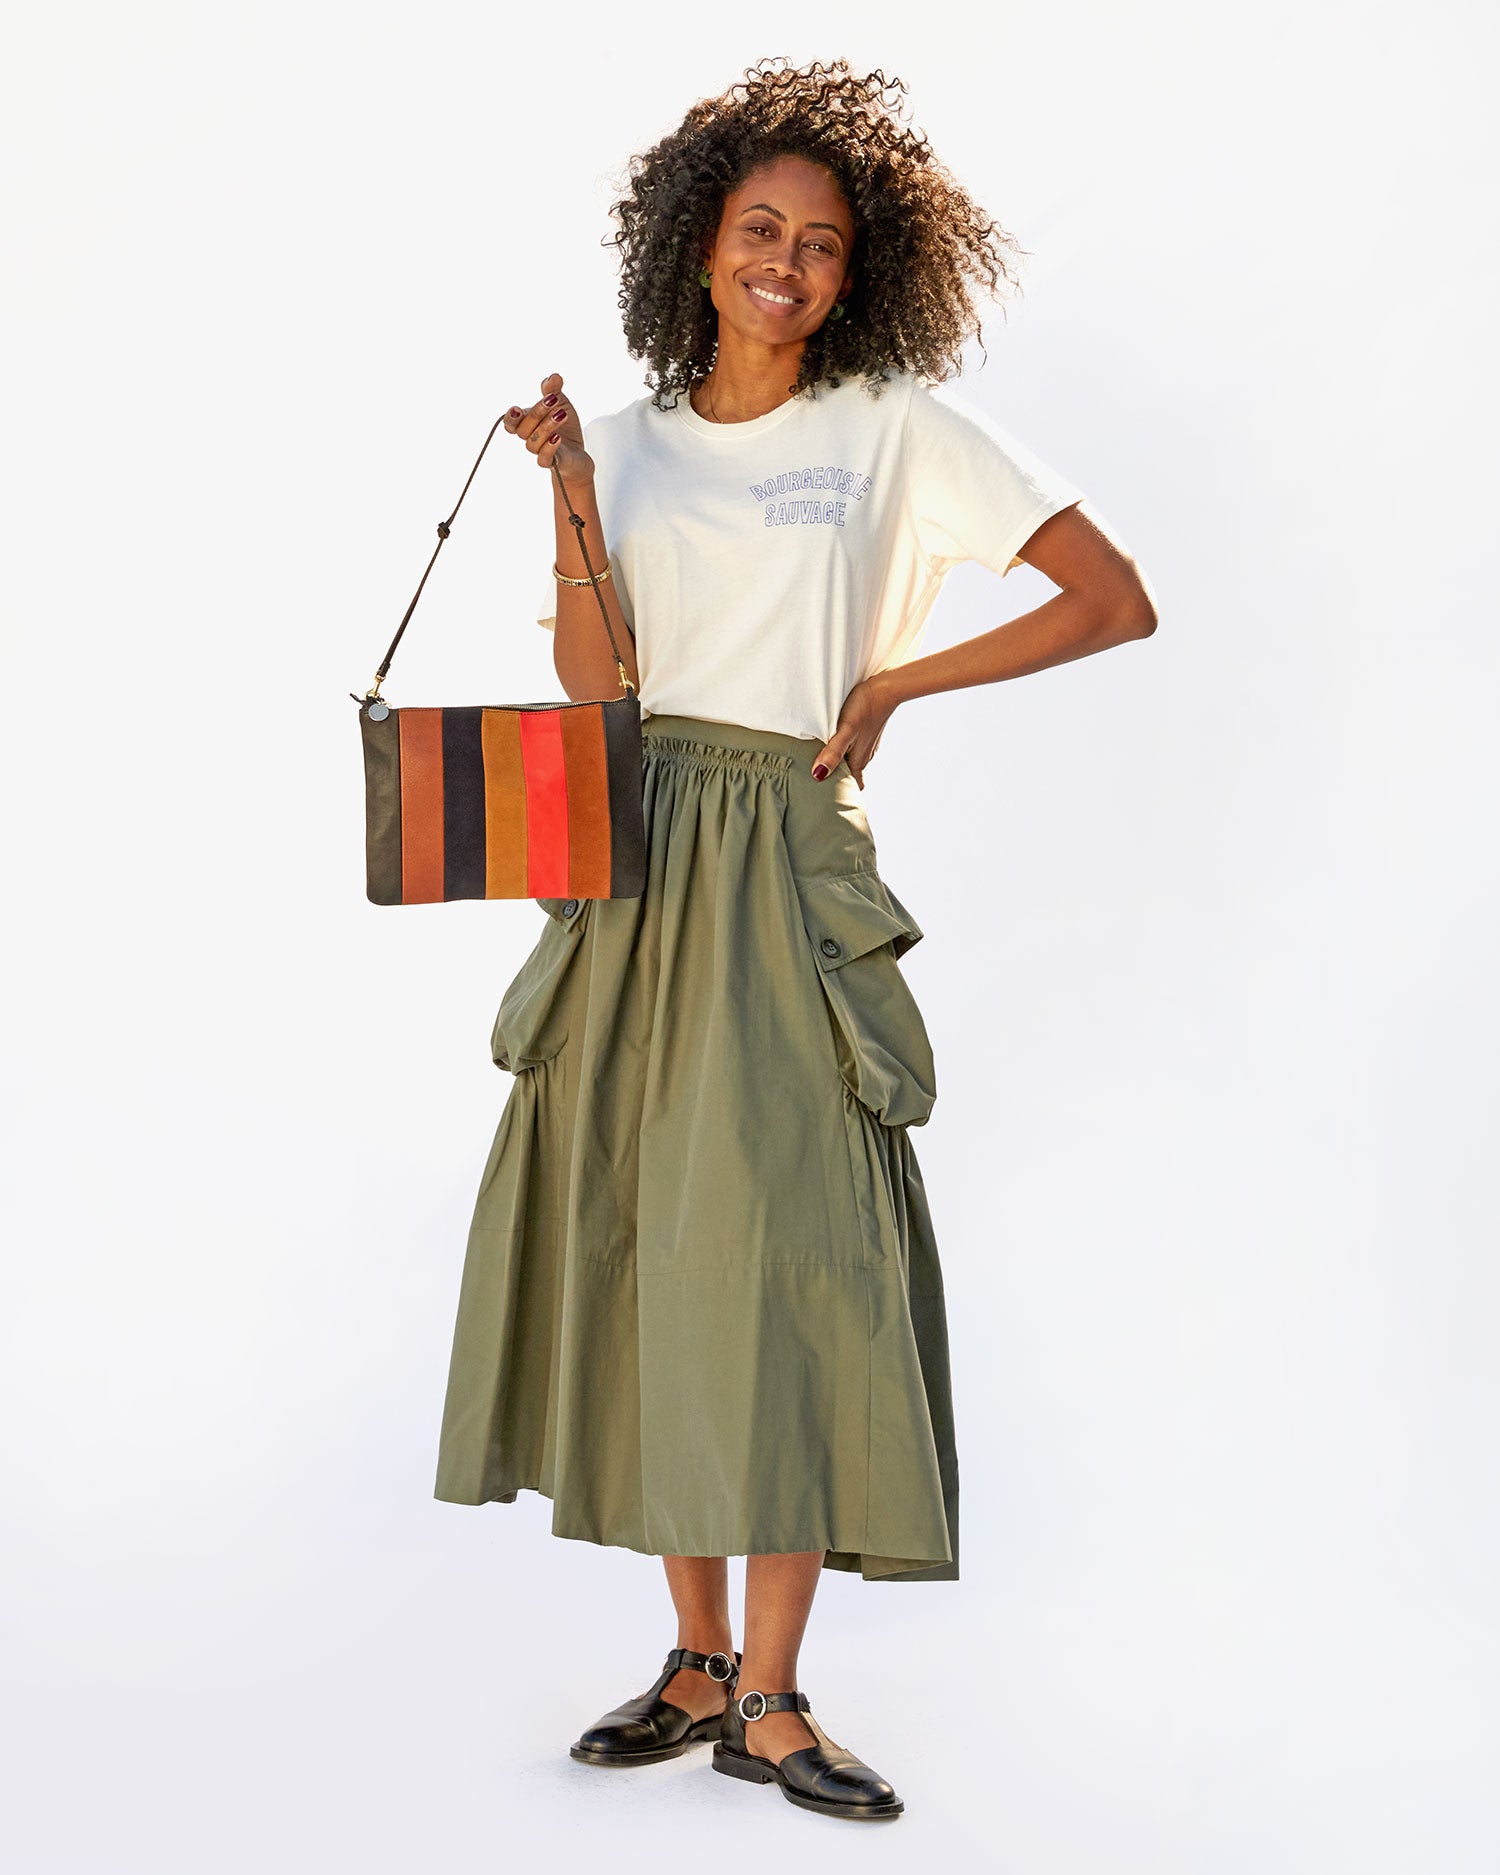 Mecca in a tshirt and an army green skirt holding a flat clutch with tabs by the Black Thin Knotted Shoulder Strap